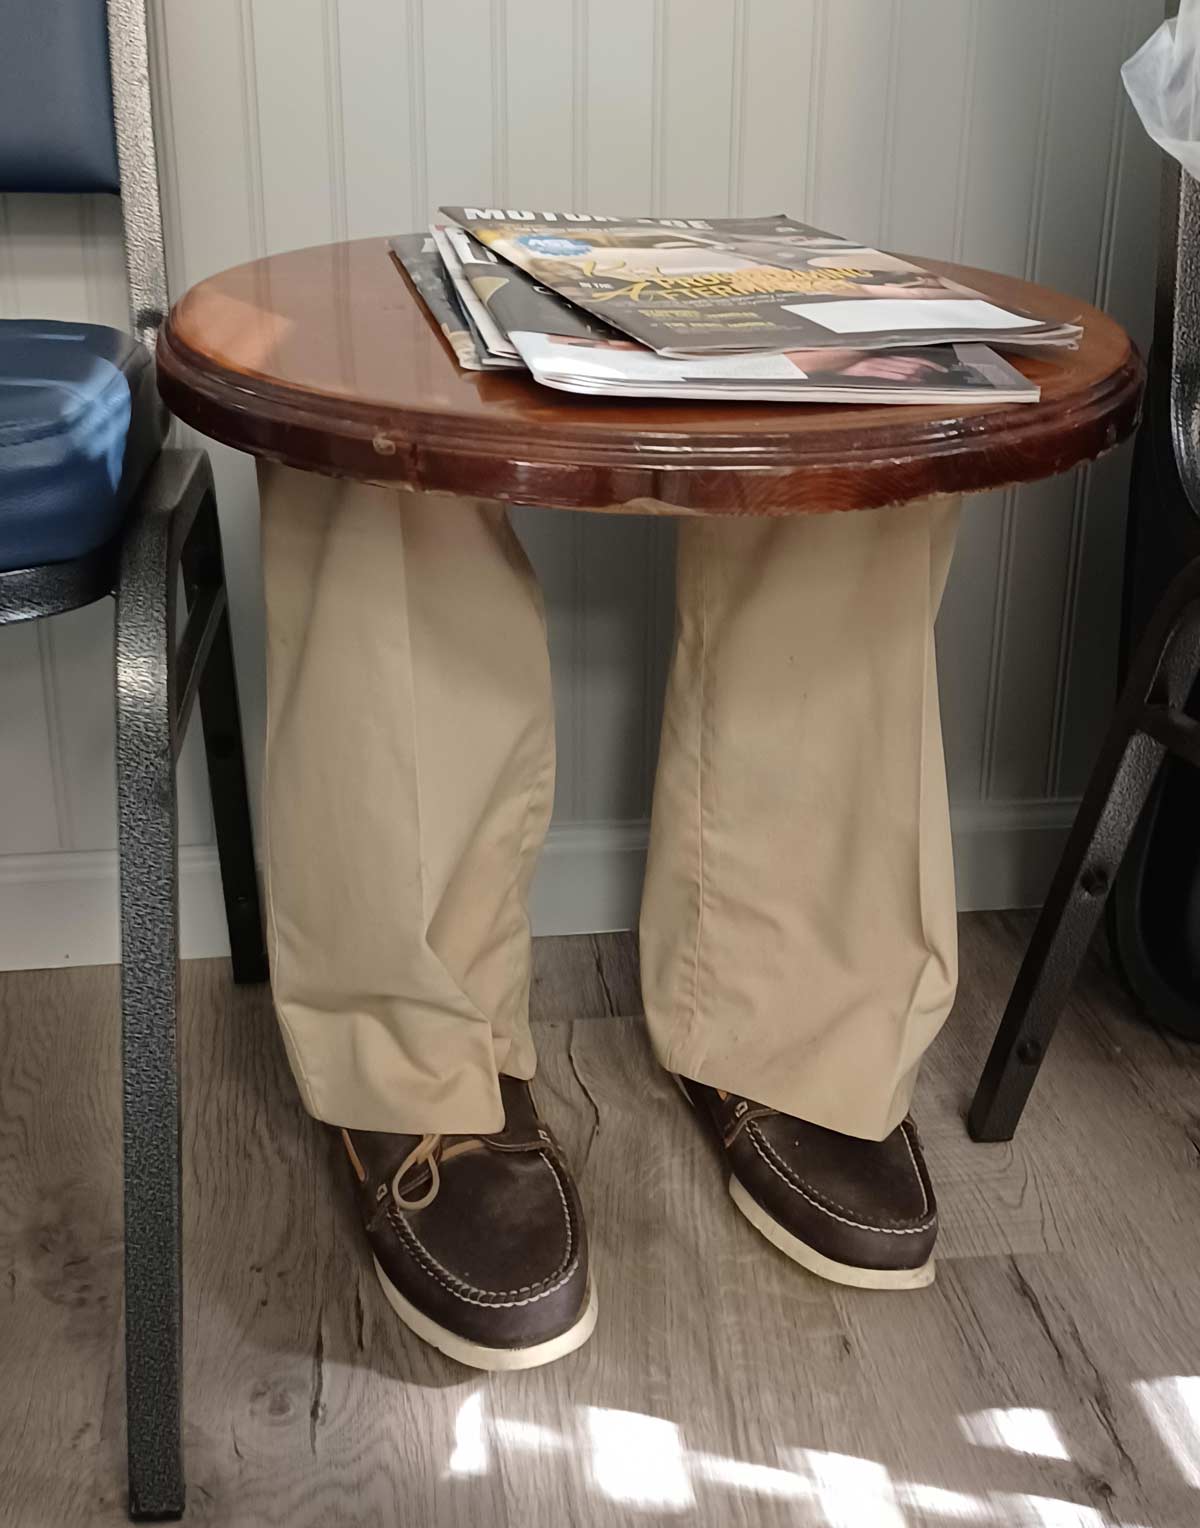 Coffee table with fully clothed legs